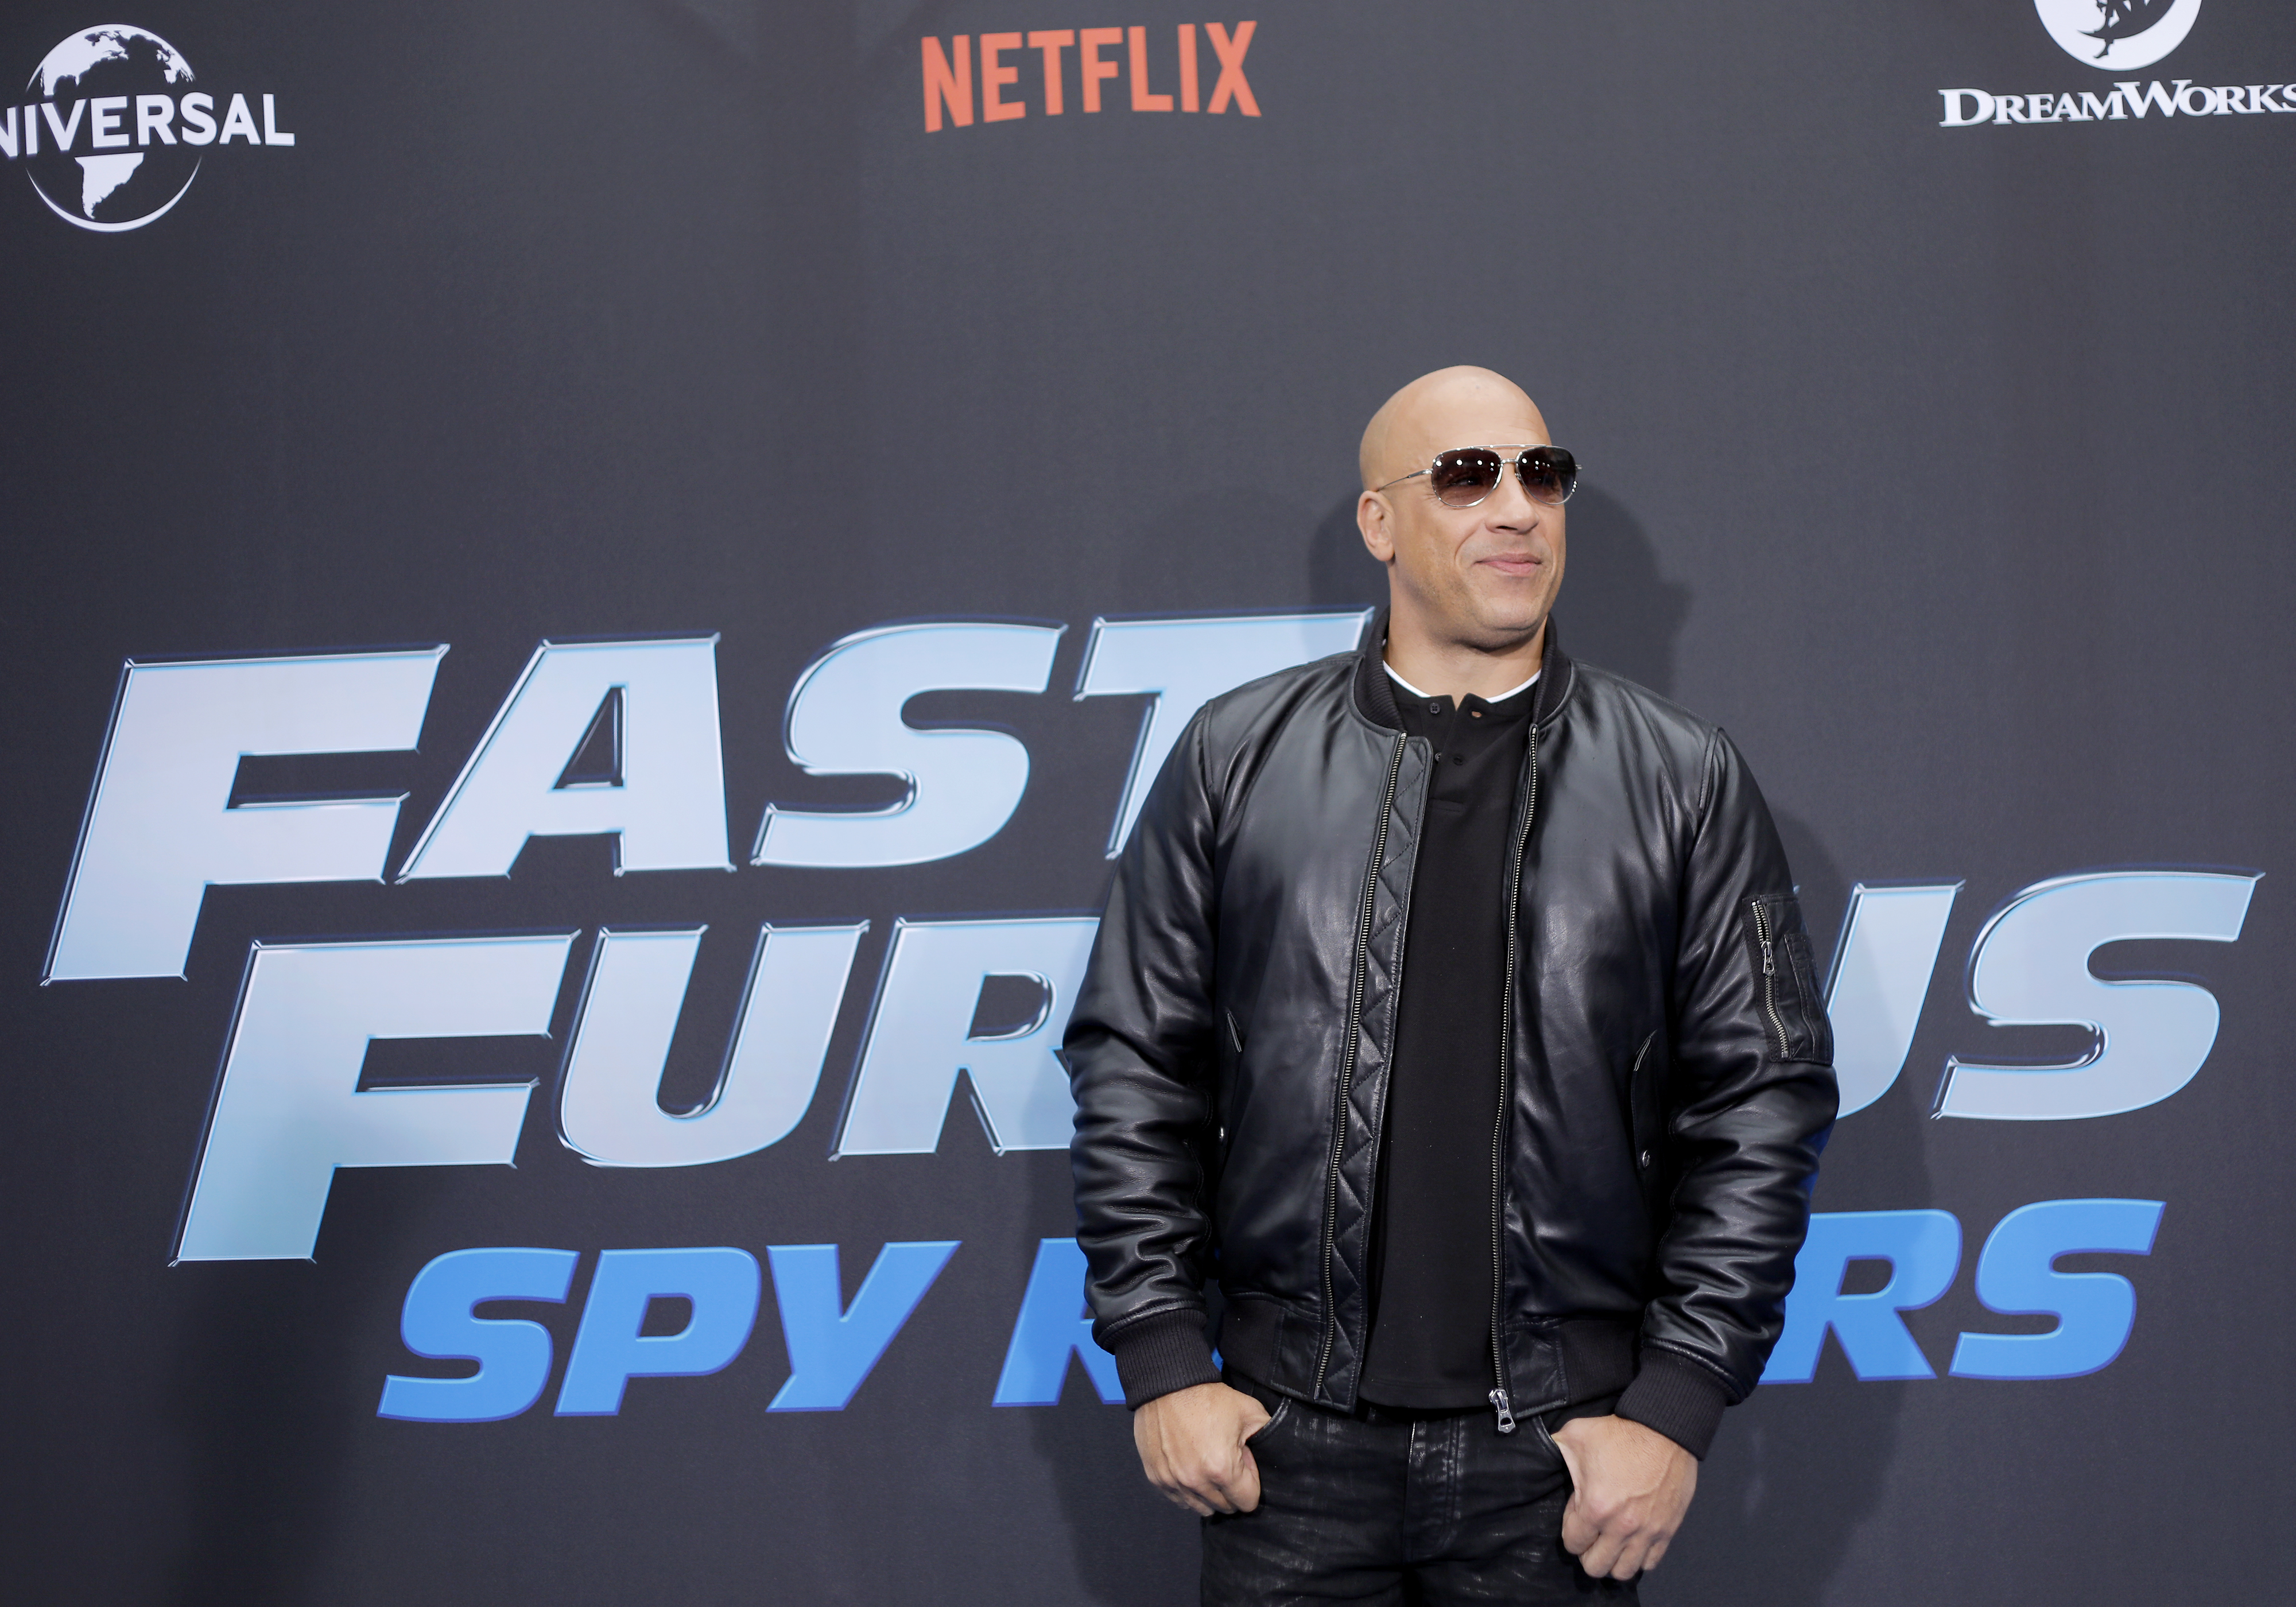 Vin Diesel attends the premiere of "Fast And Furious: Spy Racers" on December 7, 2019 in Universal City, California | Source: Getty Images